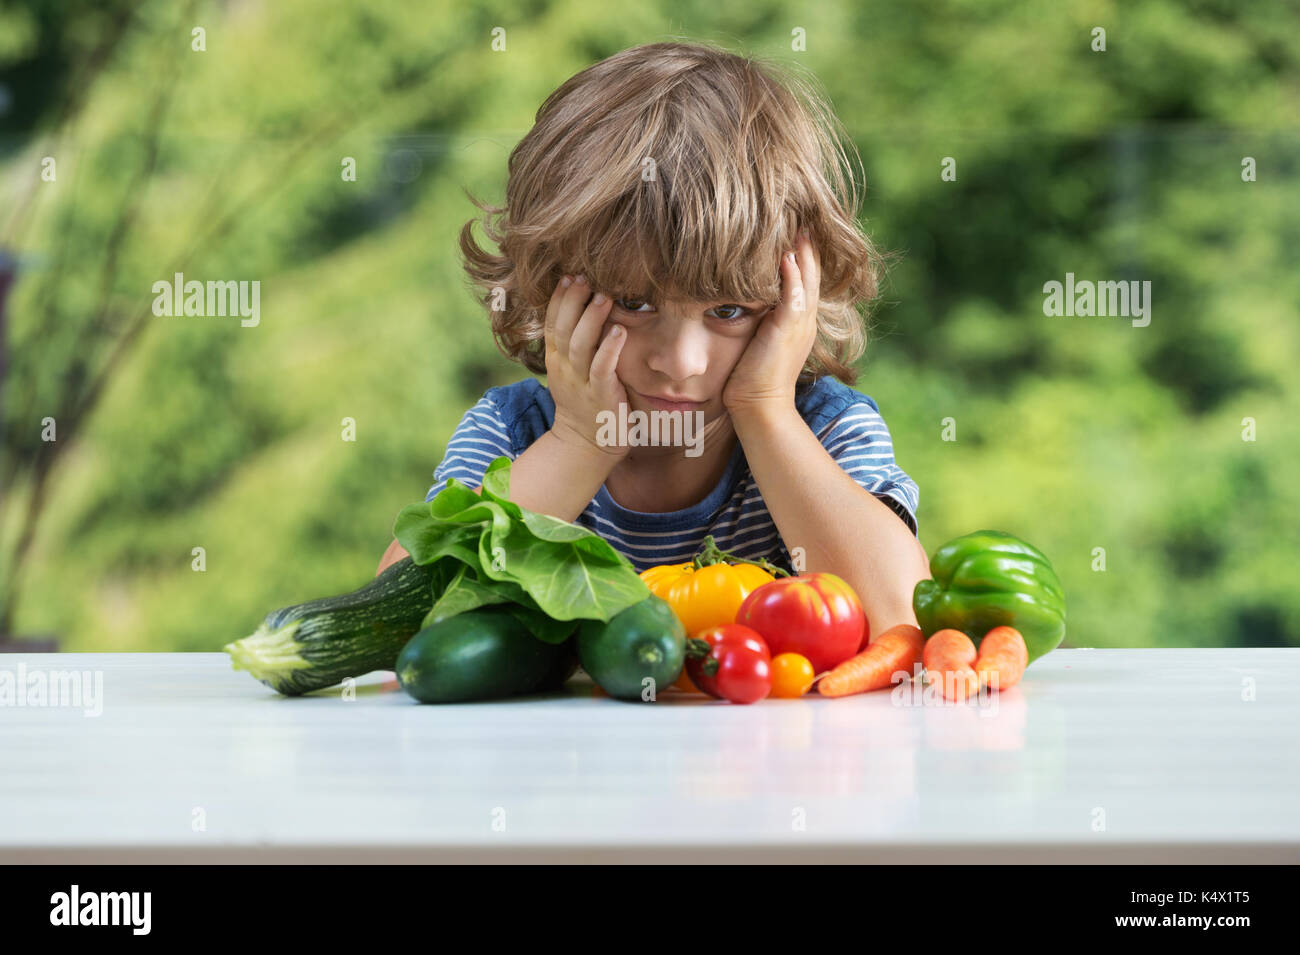 Cute little boy sitting at the table, unhappy with his vegetable meal, bad eating habits, nutrition and healthy eating concept Stock Photo